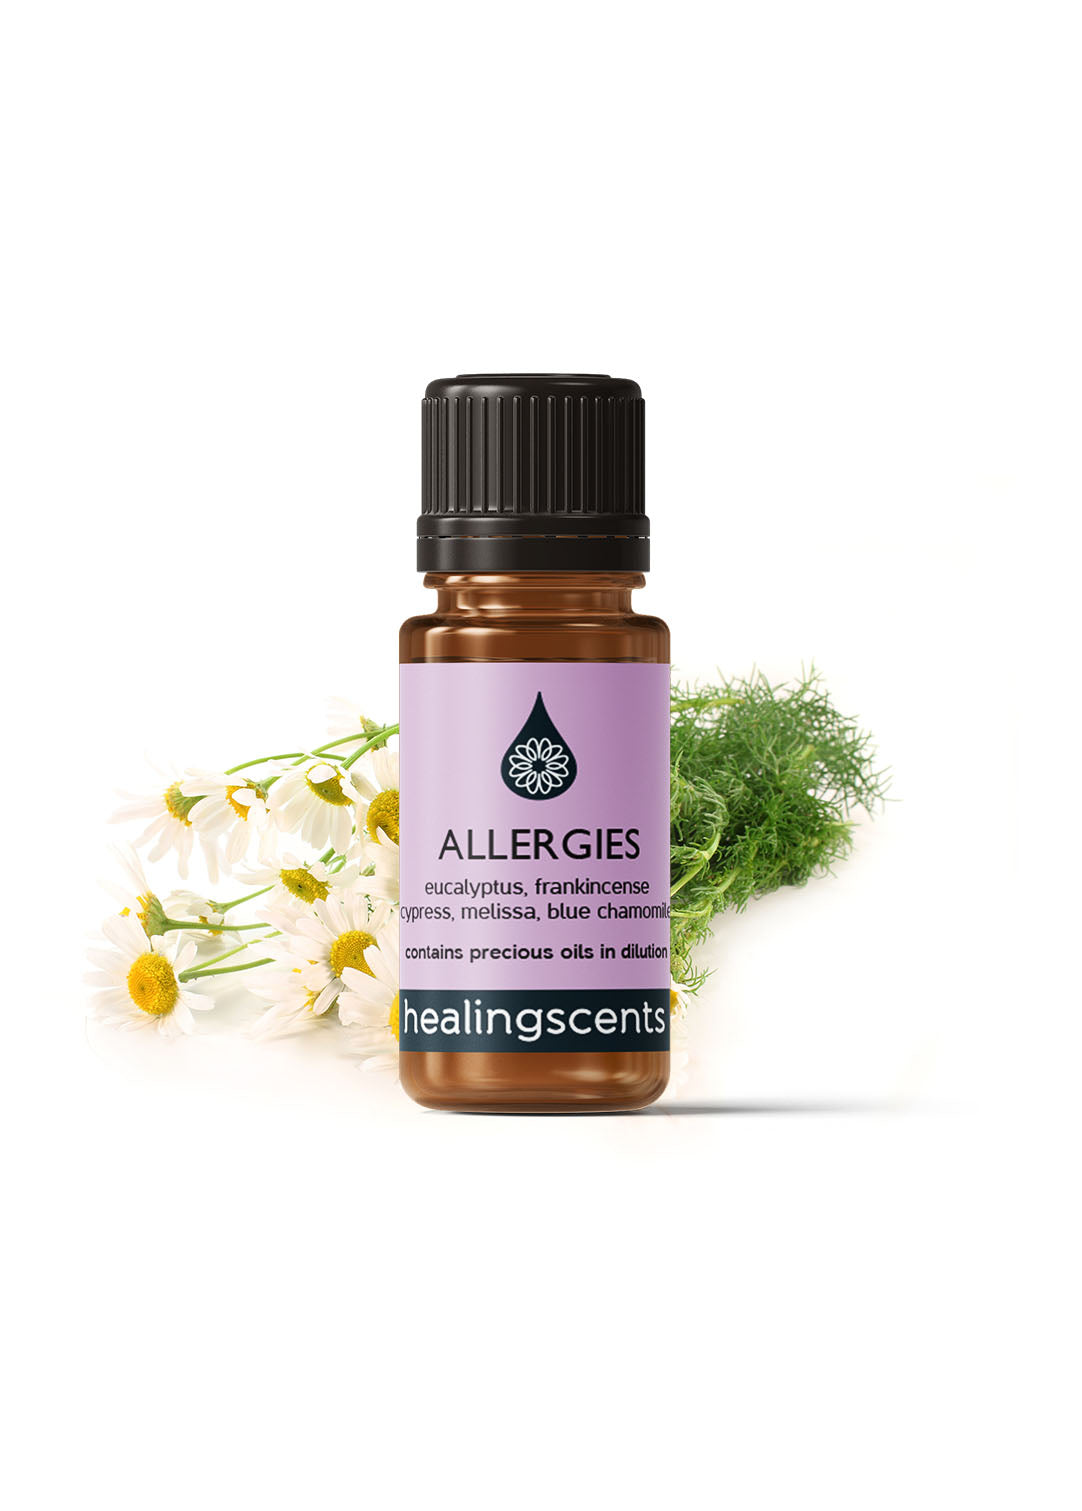 Allergies Synergy Blend Diffuser Blend Healingscents   